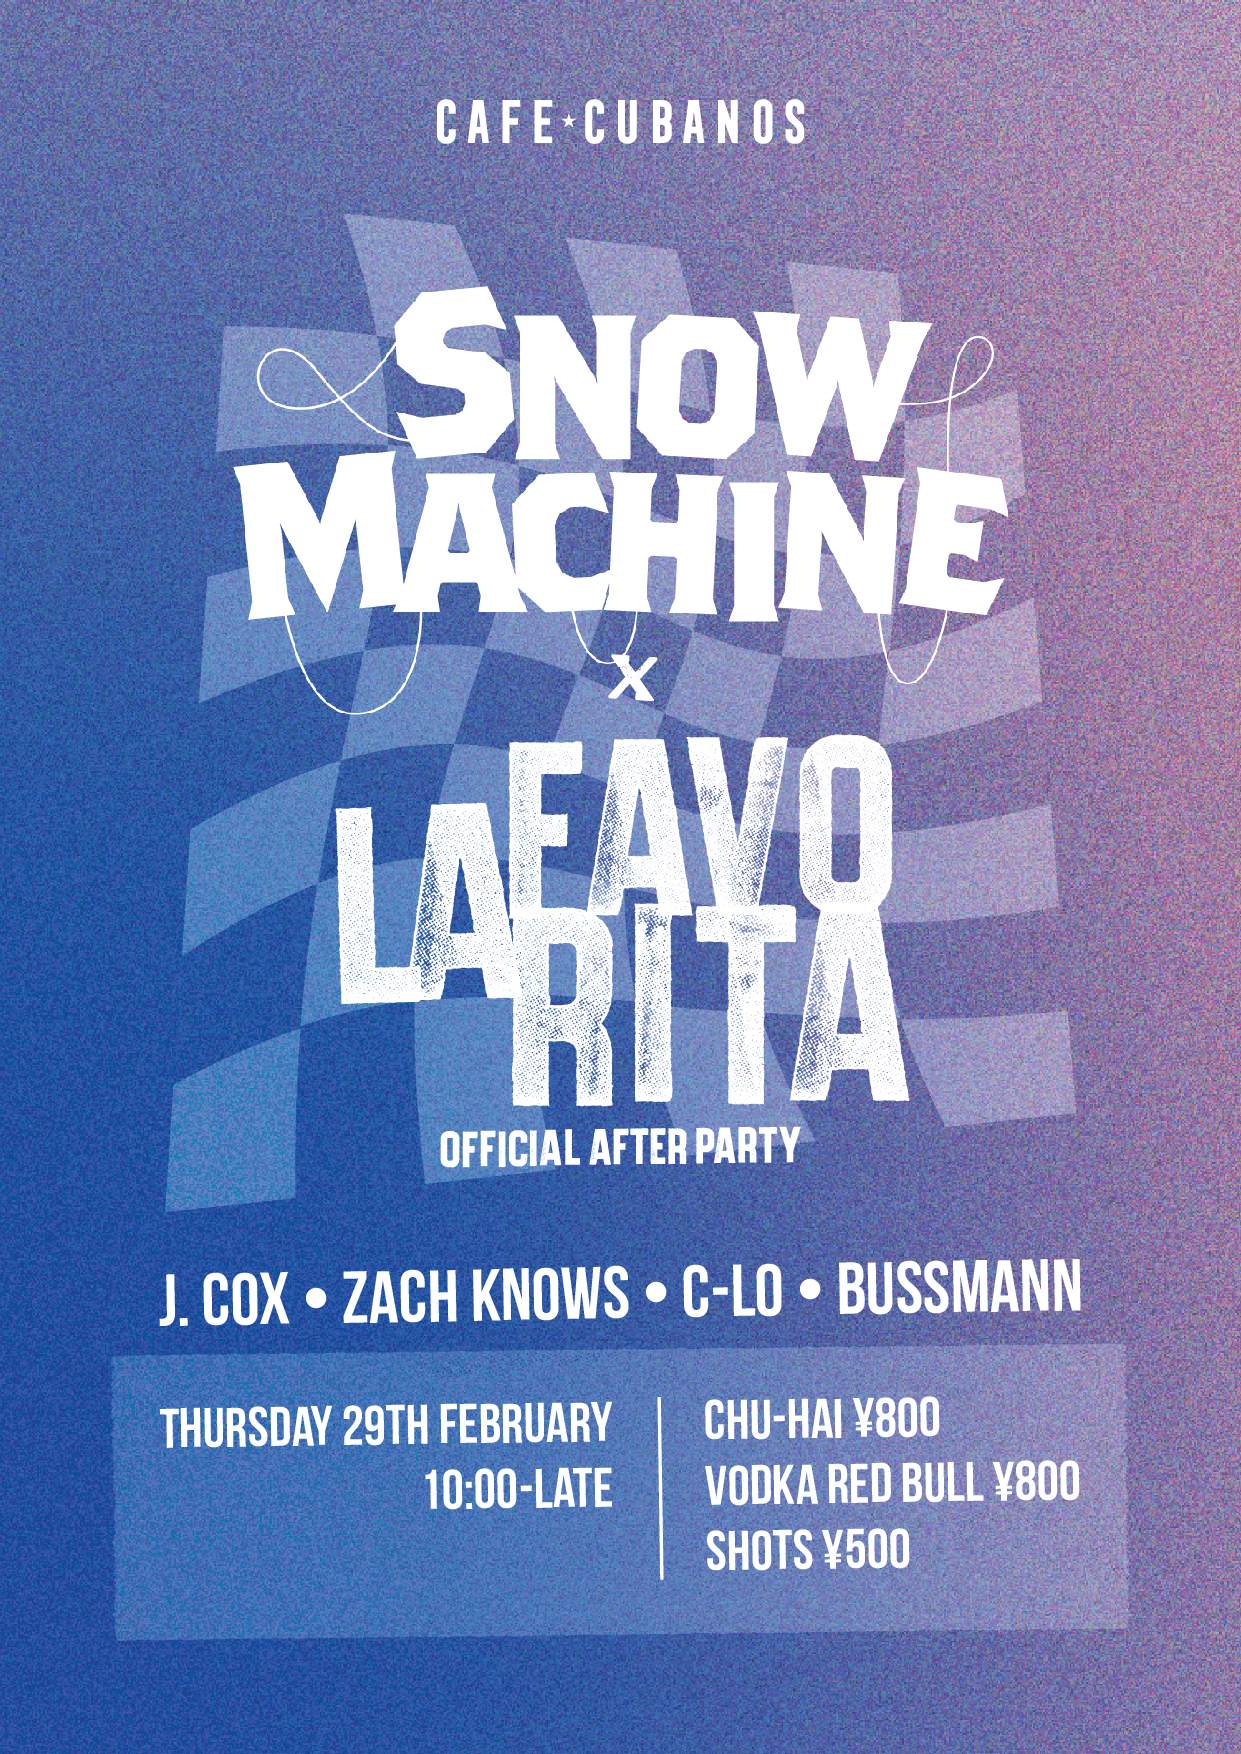 La Favorita x Snow Machine: Official After-Party - Day 3 at Cafe 